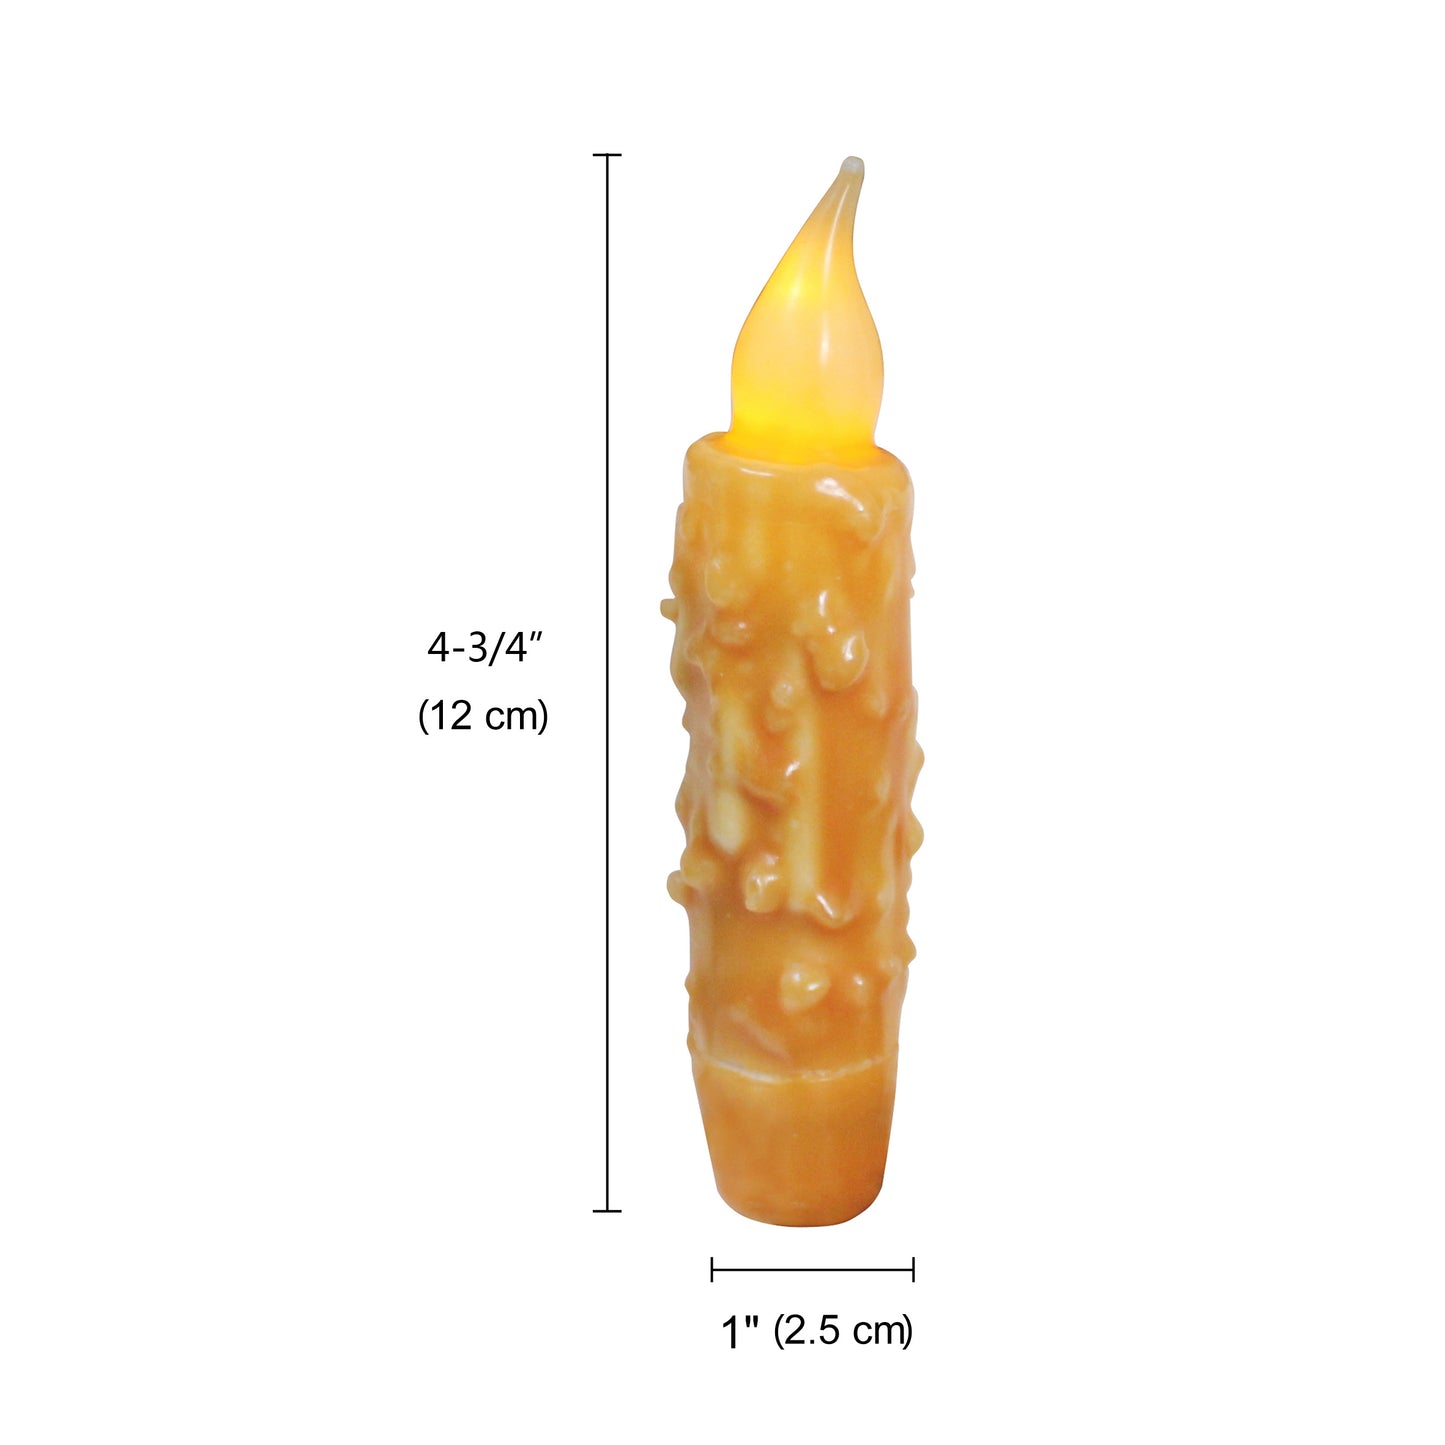 CVHOMEDECO. Real Wax Hand Dipped Battery Operated LED Timer Taper Candles Rustic Primitive Flameless Lights Decor, 4.75 Inch, Orange, 6 PCS in a Package